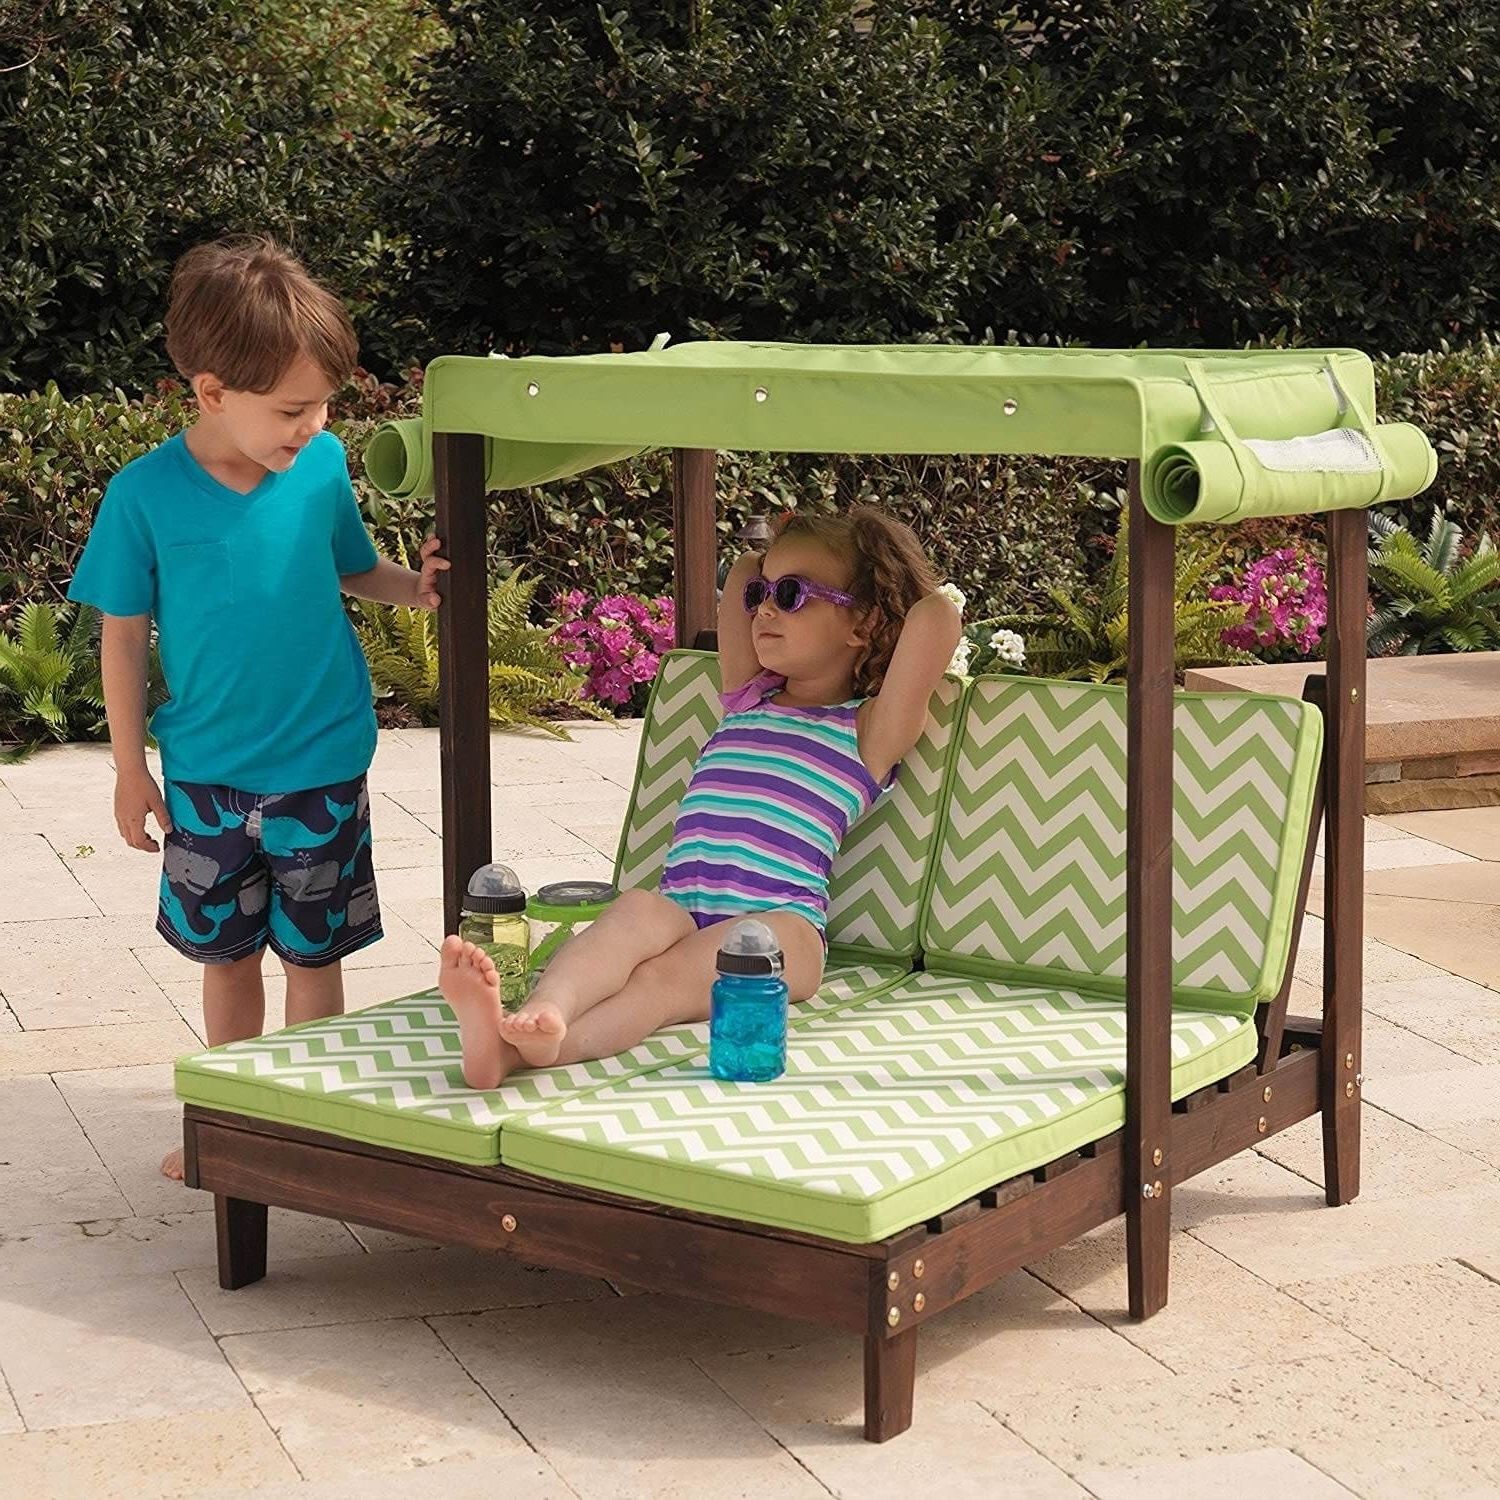 Outdoor : Lounge Chair Outdoor Folding Best Indoor Chaise Lounge Pertaining To Well Known Children's Outdoor Chaise Lounge Chairs (View 14 of 15)